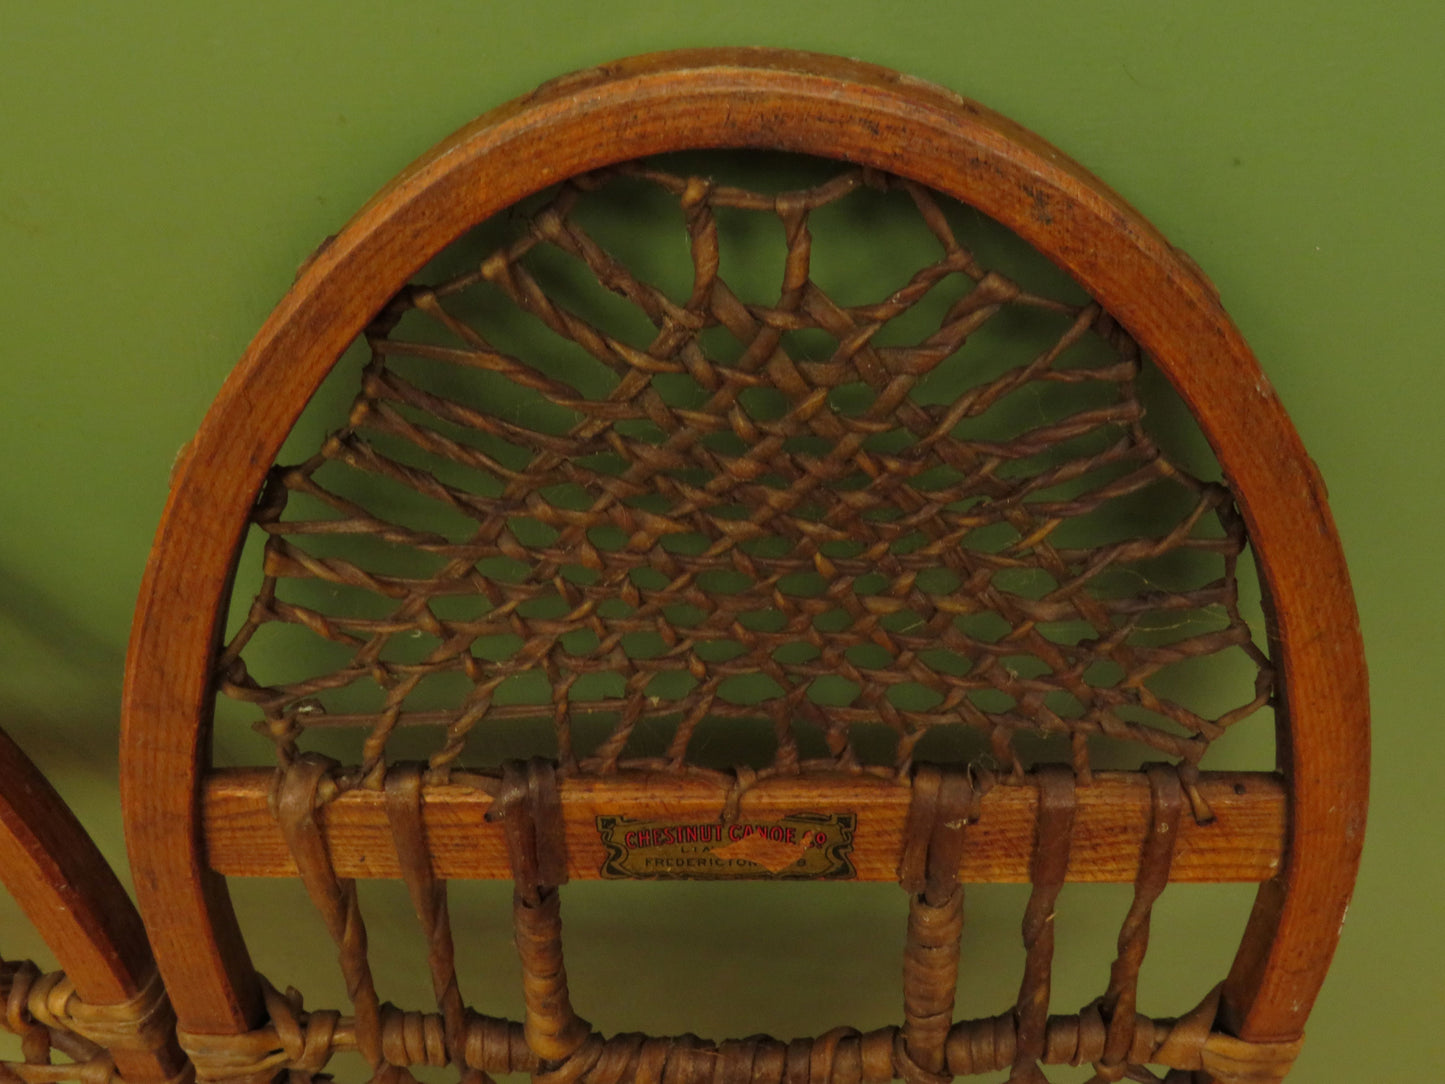 Antique Snowshoes by the Chestnut Canoe Company